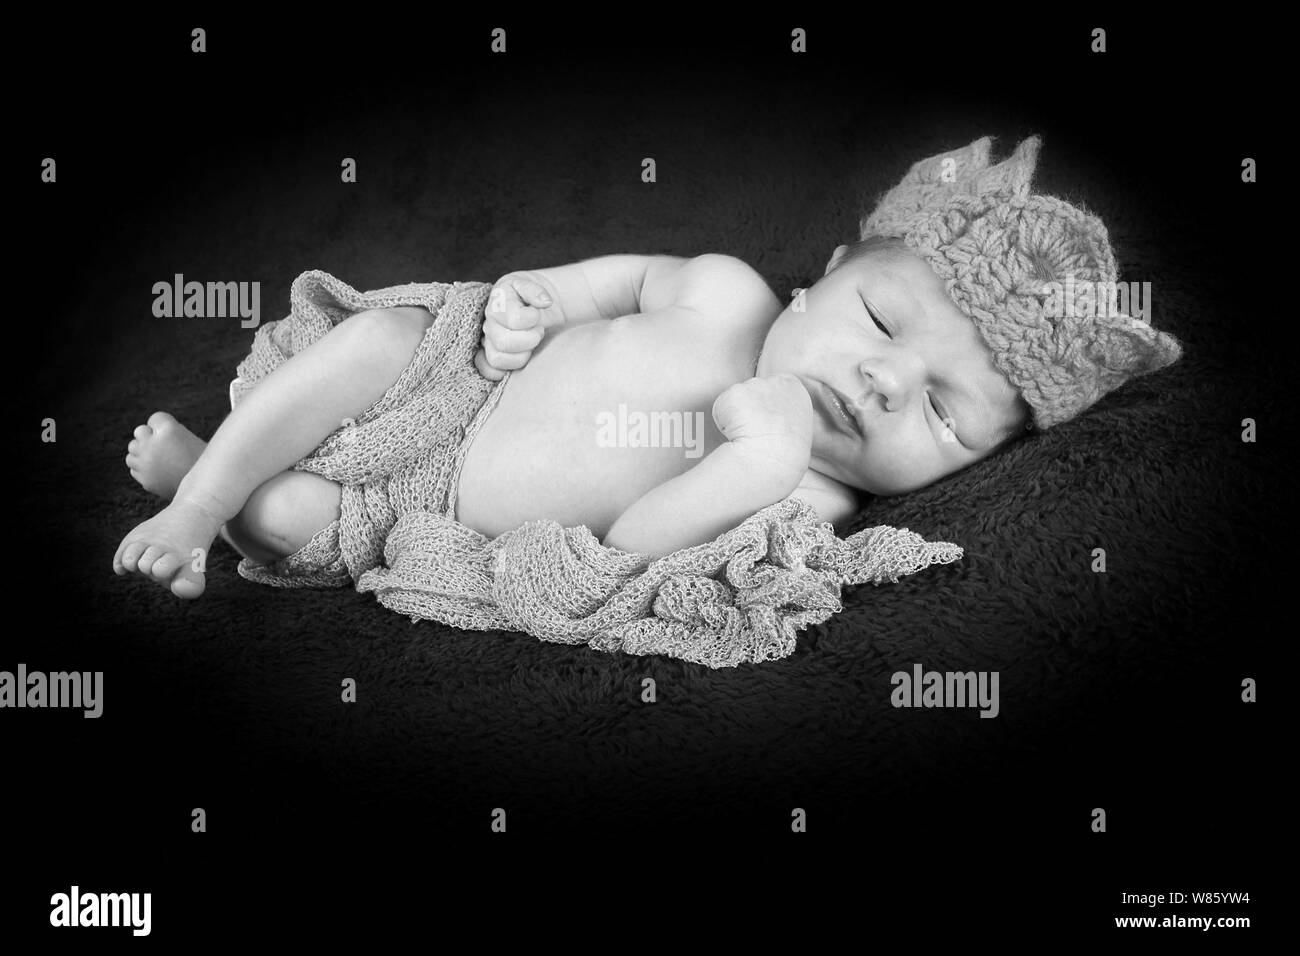 1 semaine baby boy sleeping Banque D'Images